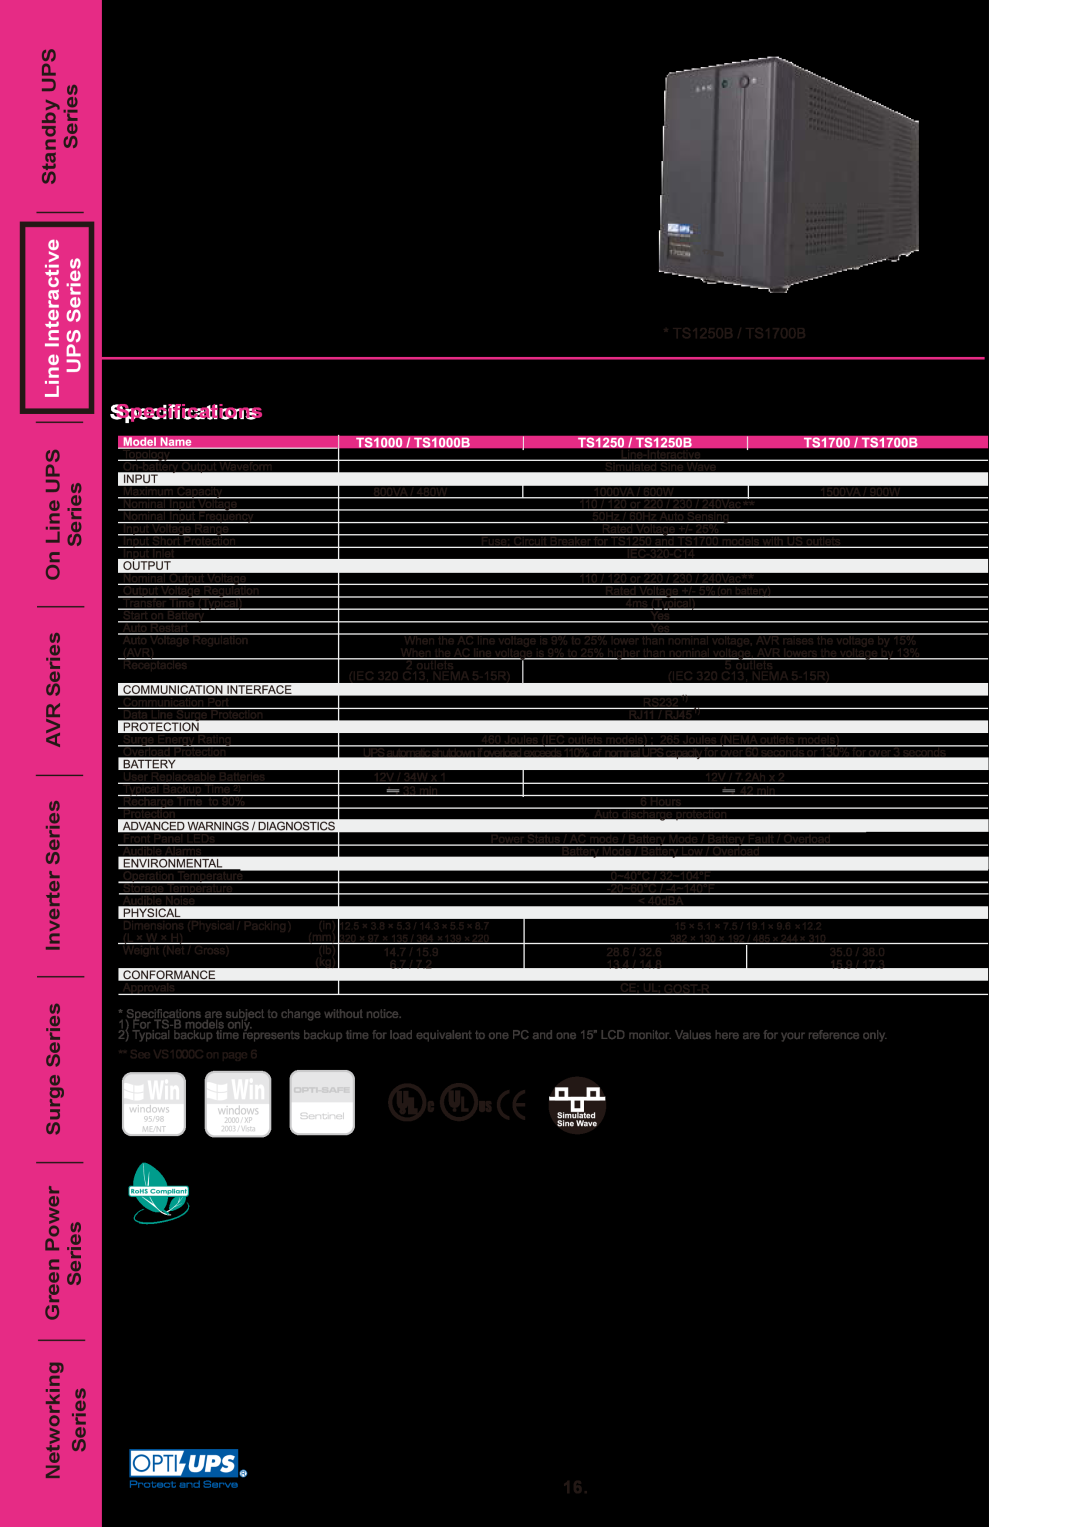 OPTI-UPS TS500, TS800C Series SeriesSeries, Specifications, Line Interactive UPS Series, outlets, IEC 320 C13, NEMA 5-15R 